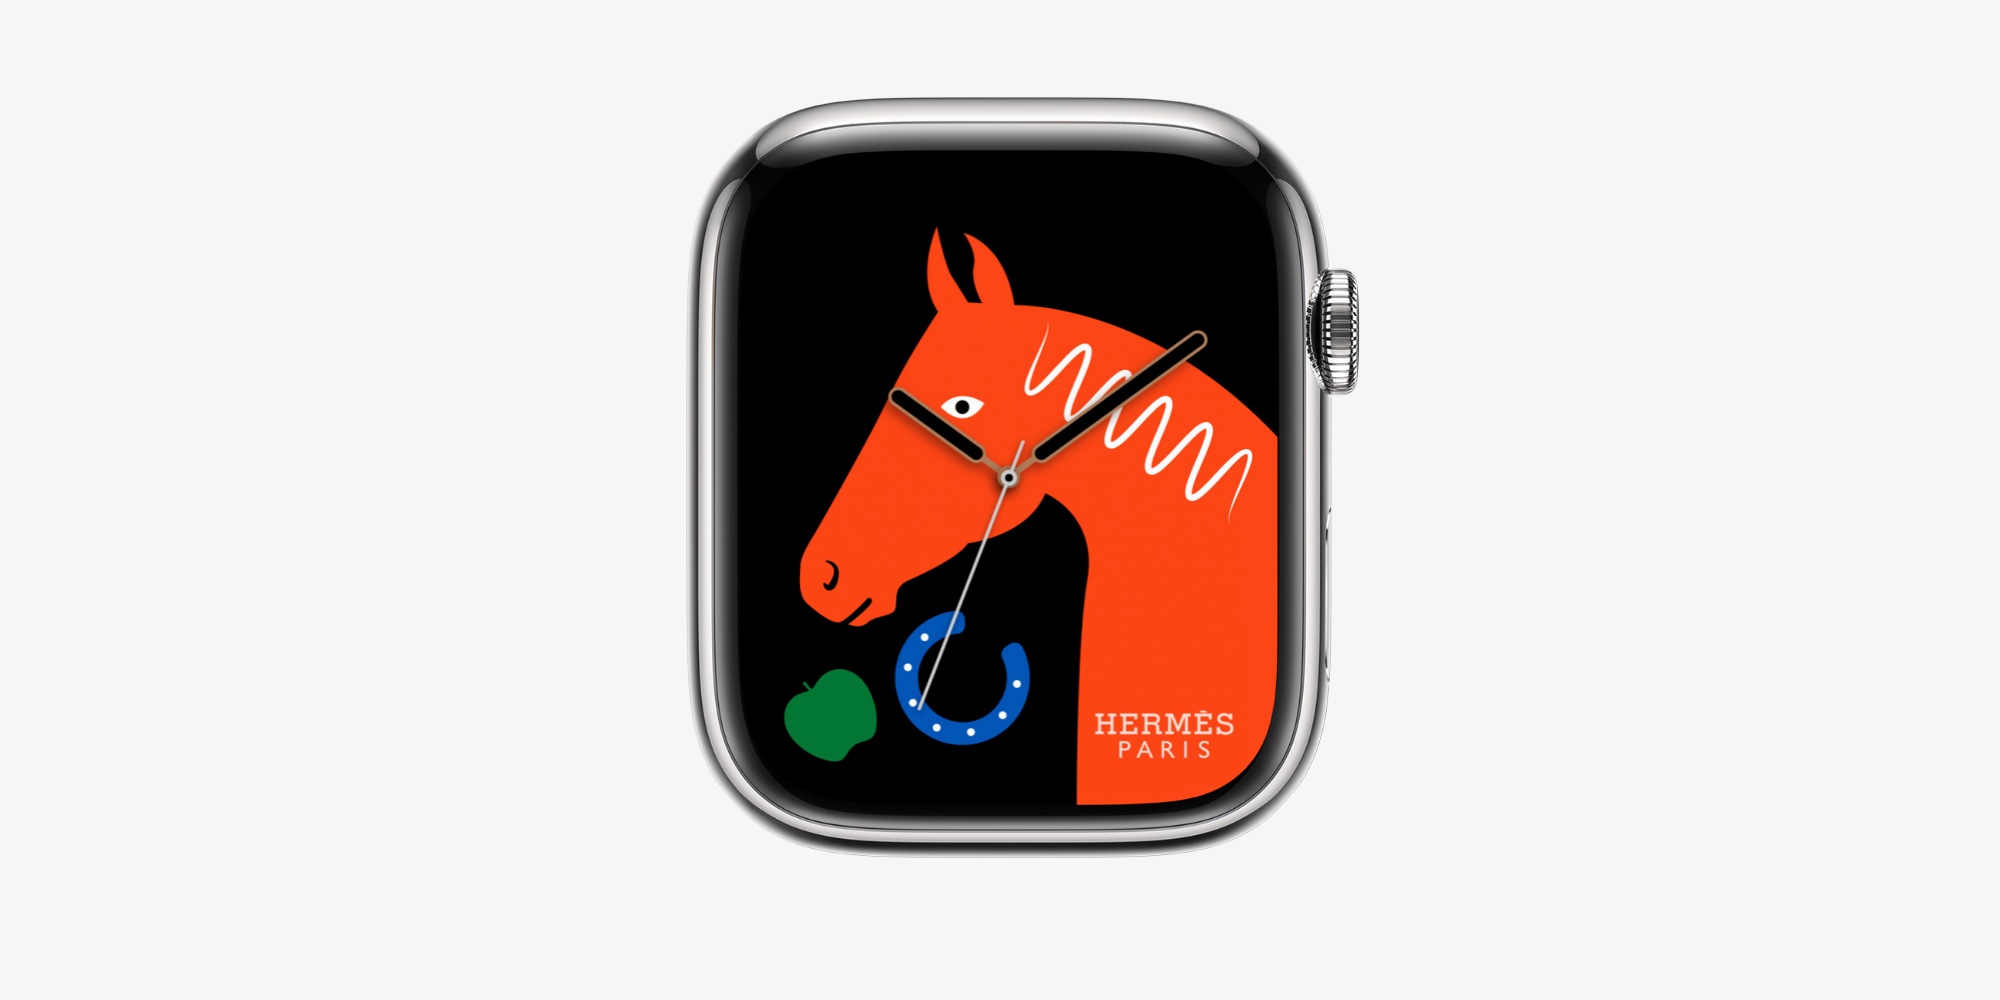 Hands-on Hermès' Apple Watch Lucky Horse face - 9to5Mac